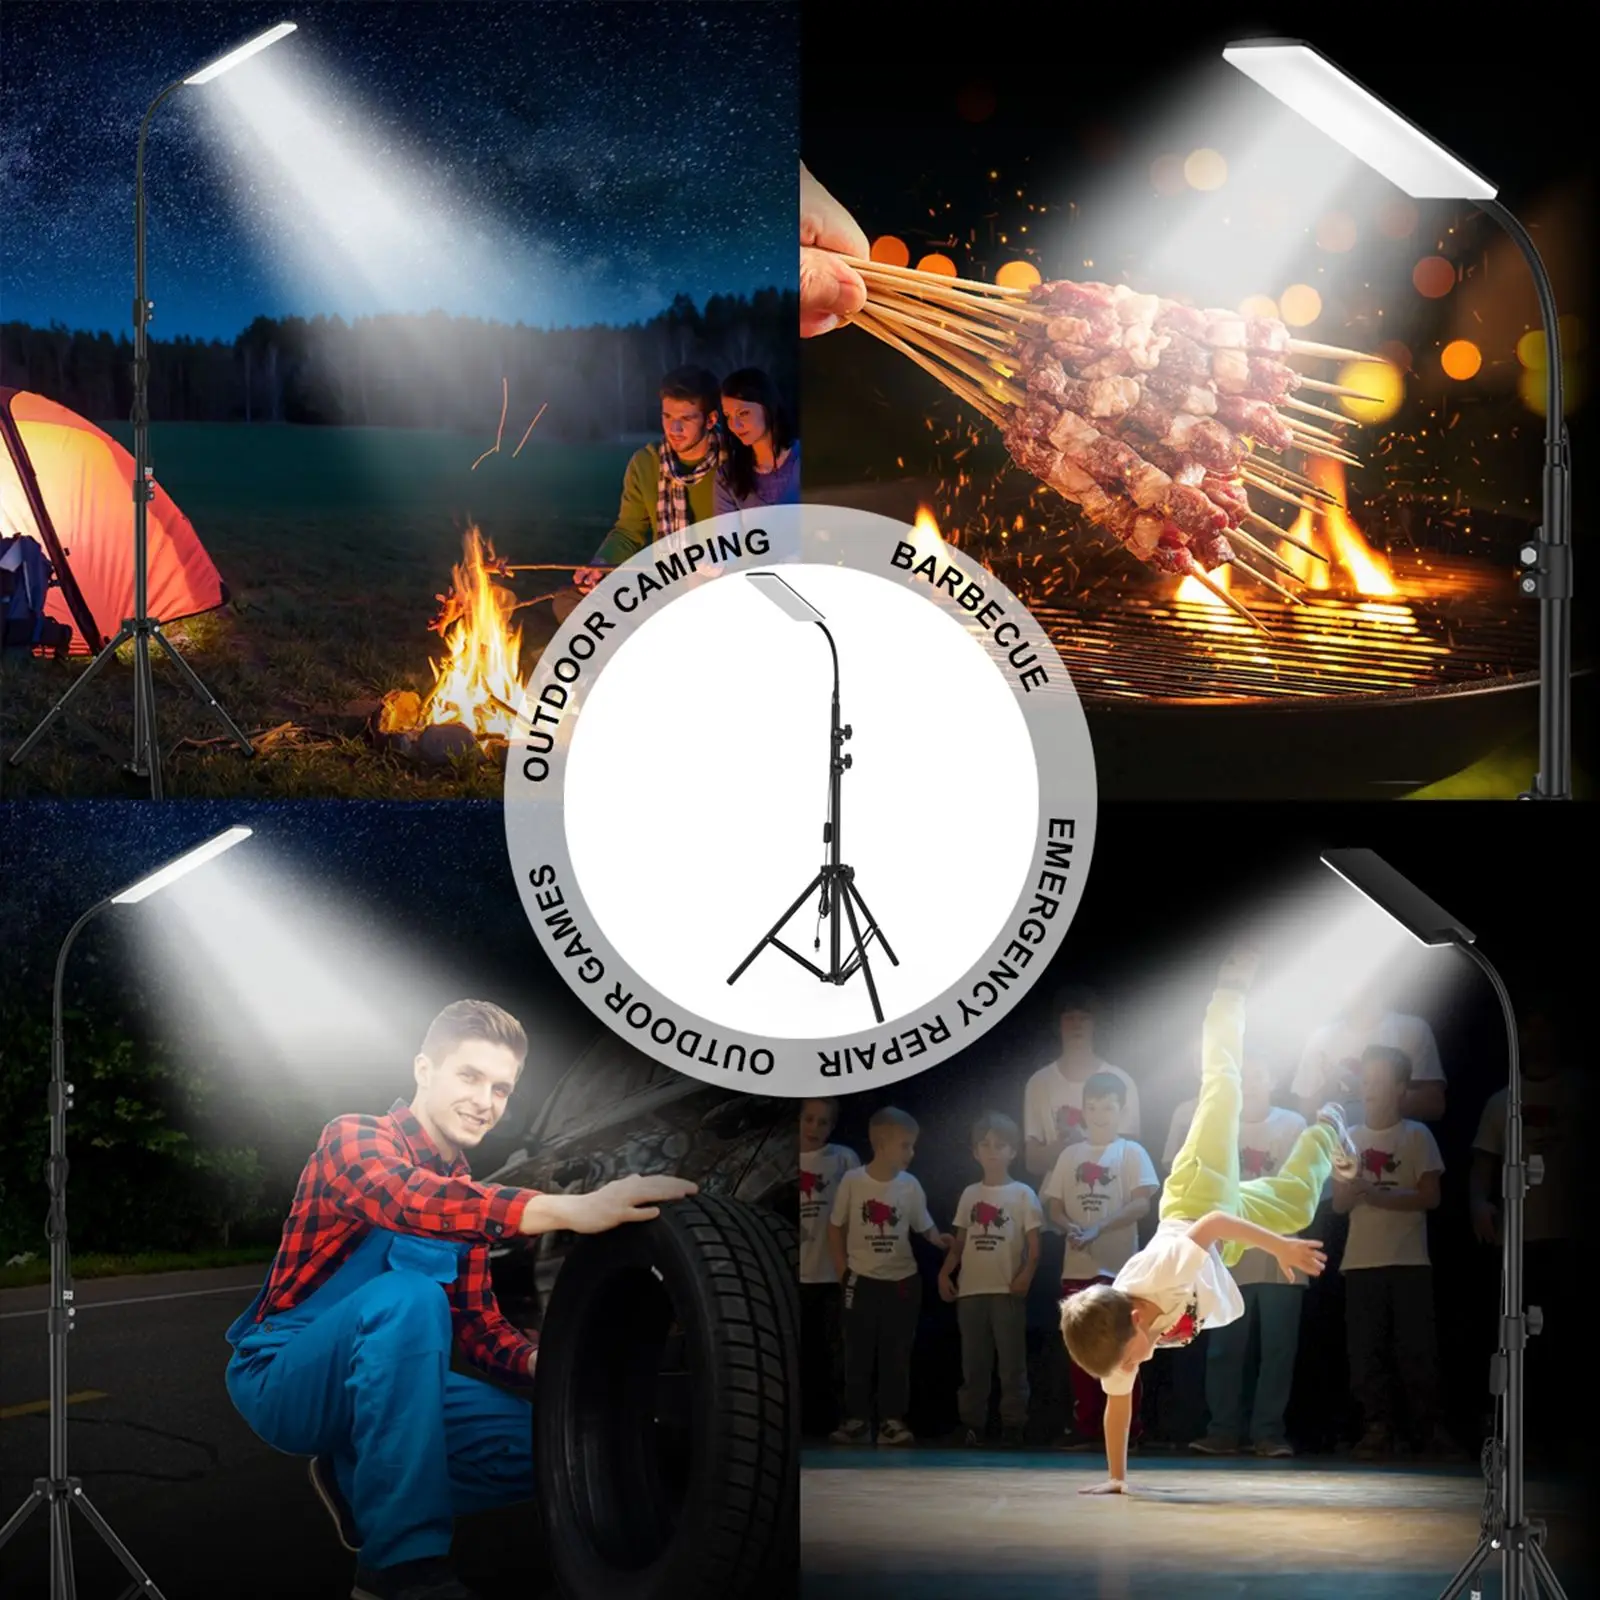 Camping LED Lights Power Bank Telescoping Pole Super Bright USB Charger Light Stand Fishing Lamp Emergency Lamp for BBQ Yard